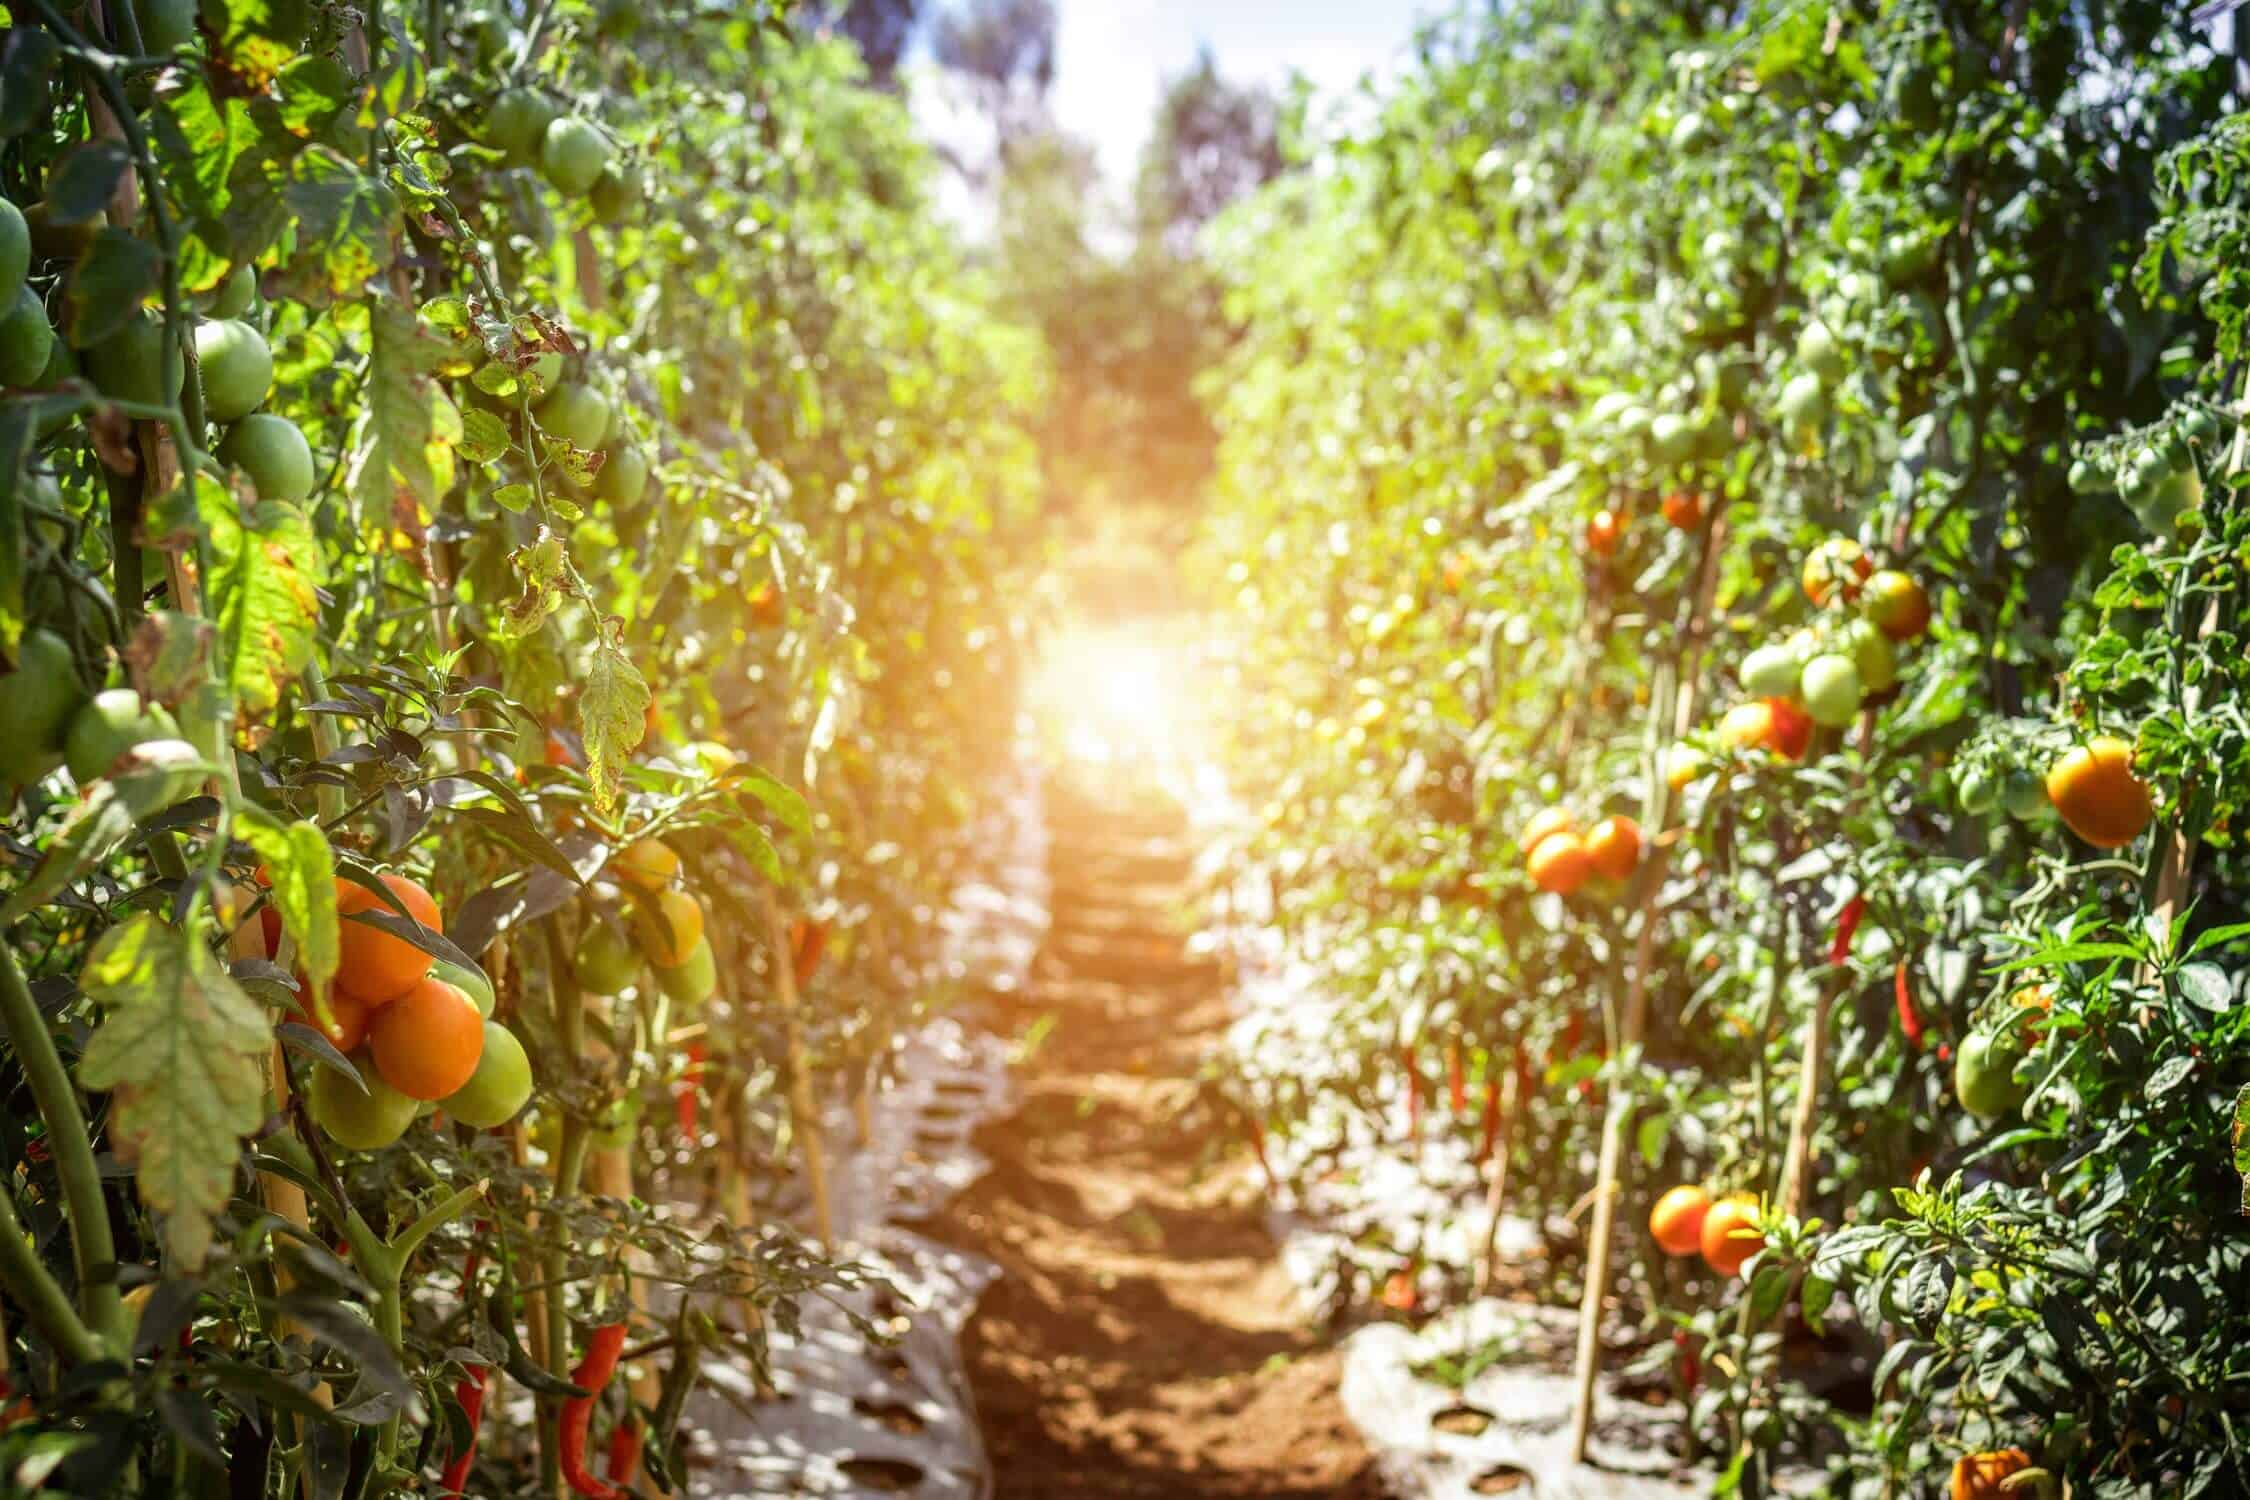 Tomatoes in a field